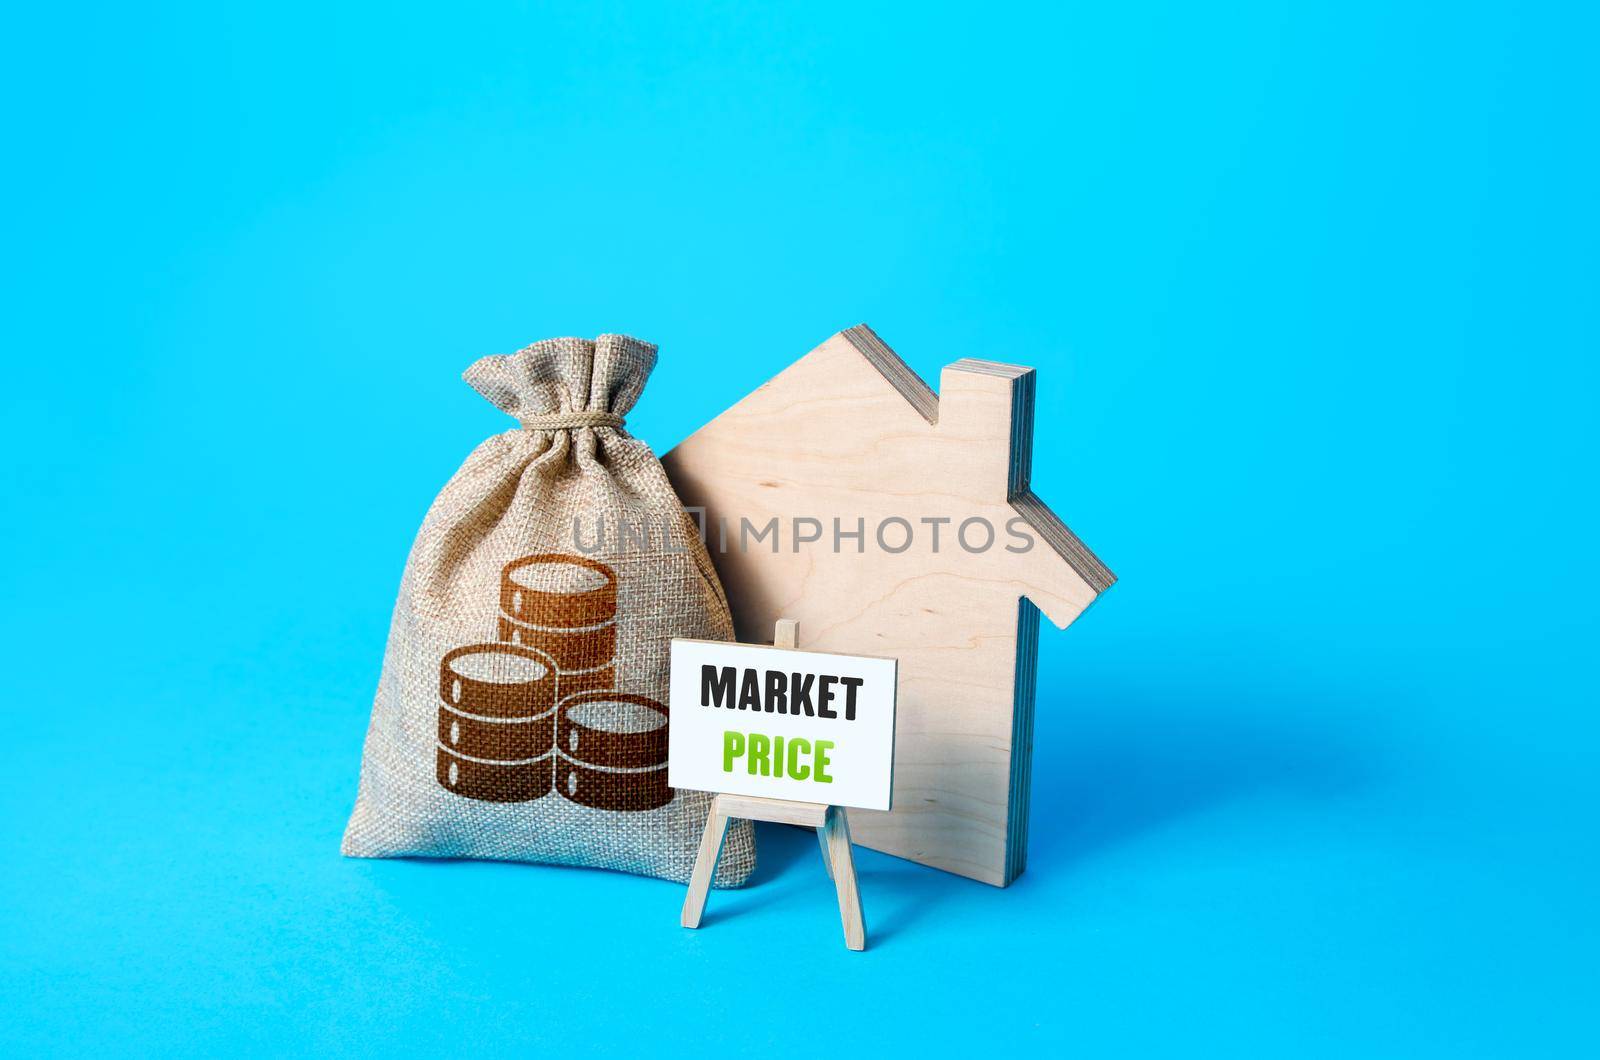 Real estate market price. Analysis of trends and trends in market prices. Impact of economic difficulties and the crisis on consumer behavior. Investment in assets. Rental business. Valuation